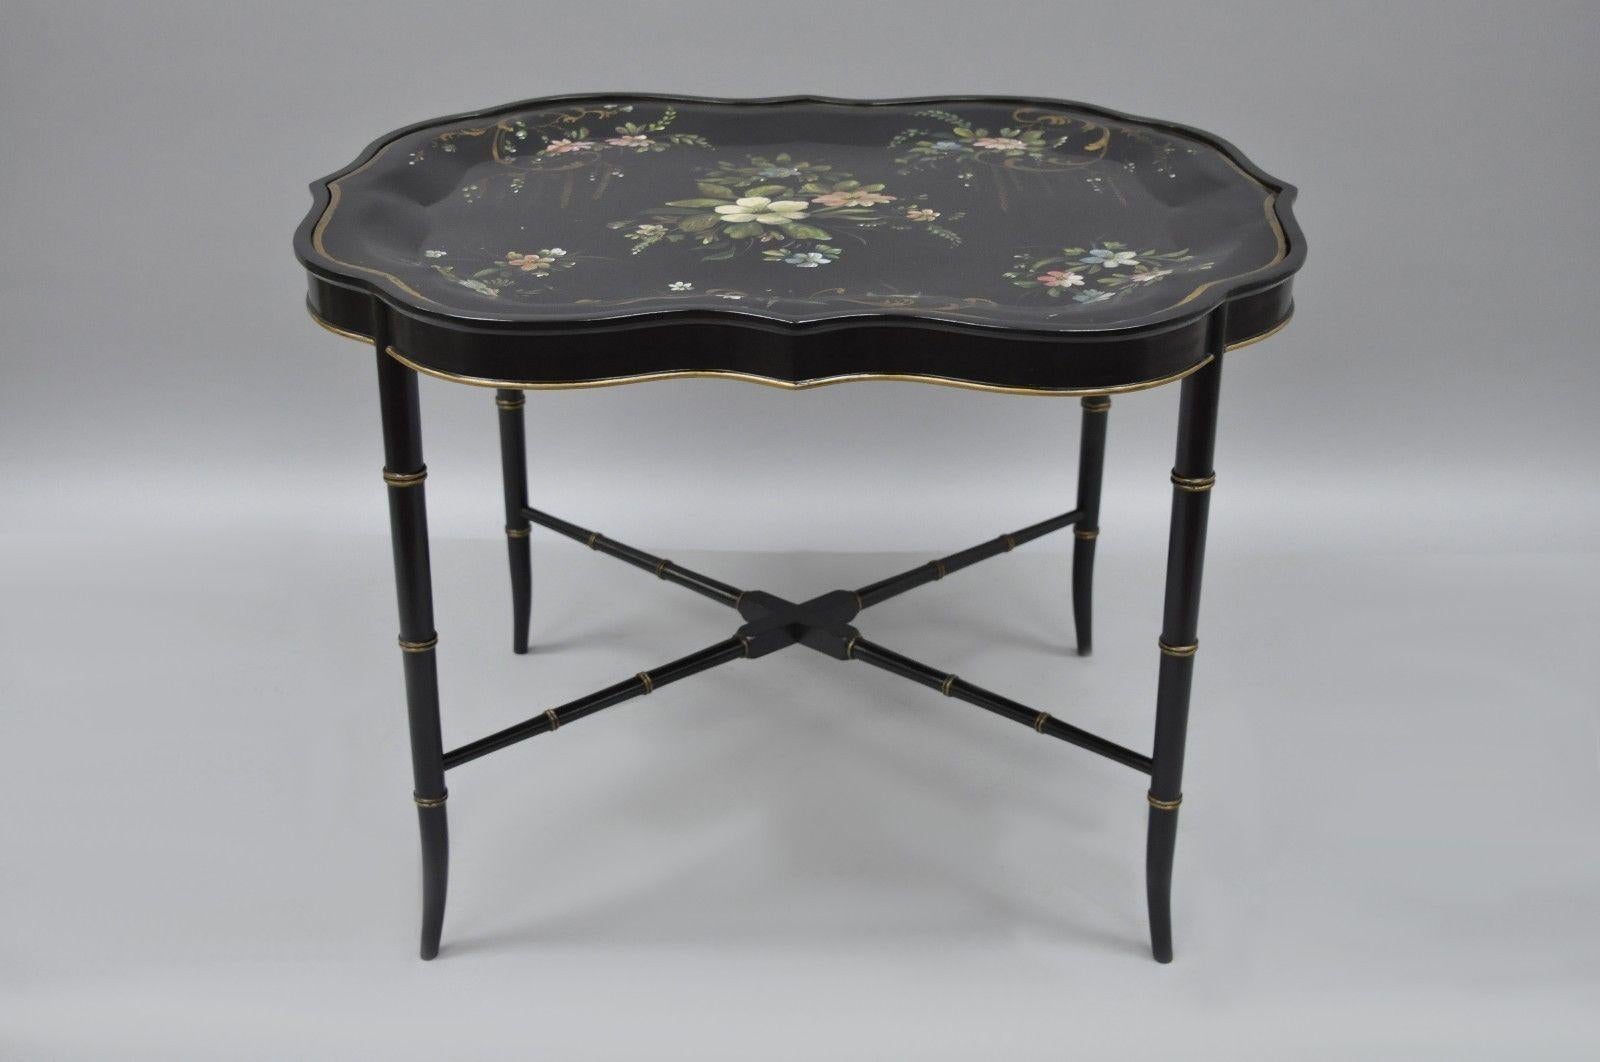 Scalloped Tole Metal Serving Tray Coffee Tea Table Black Faux Bamboo Chinoiserie 4